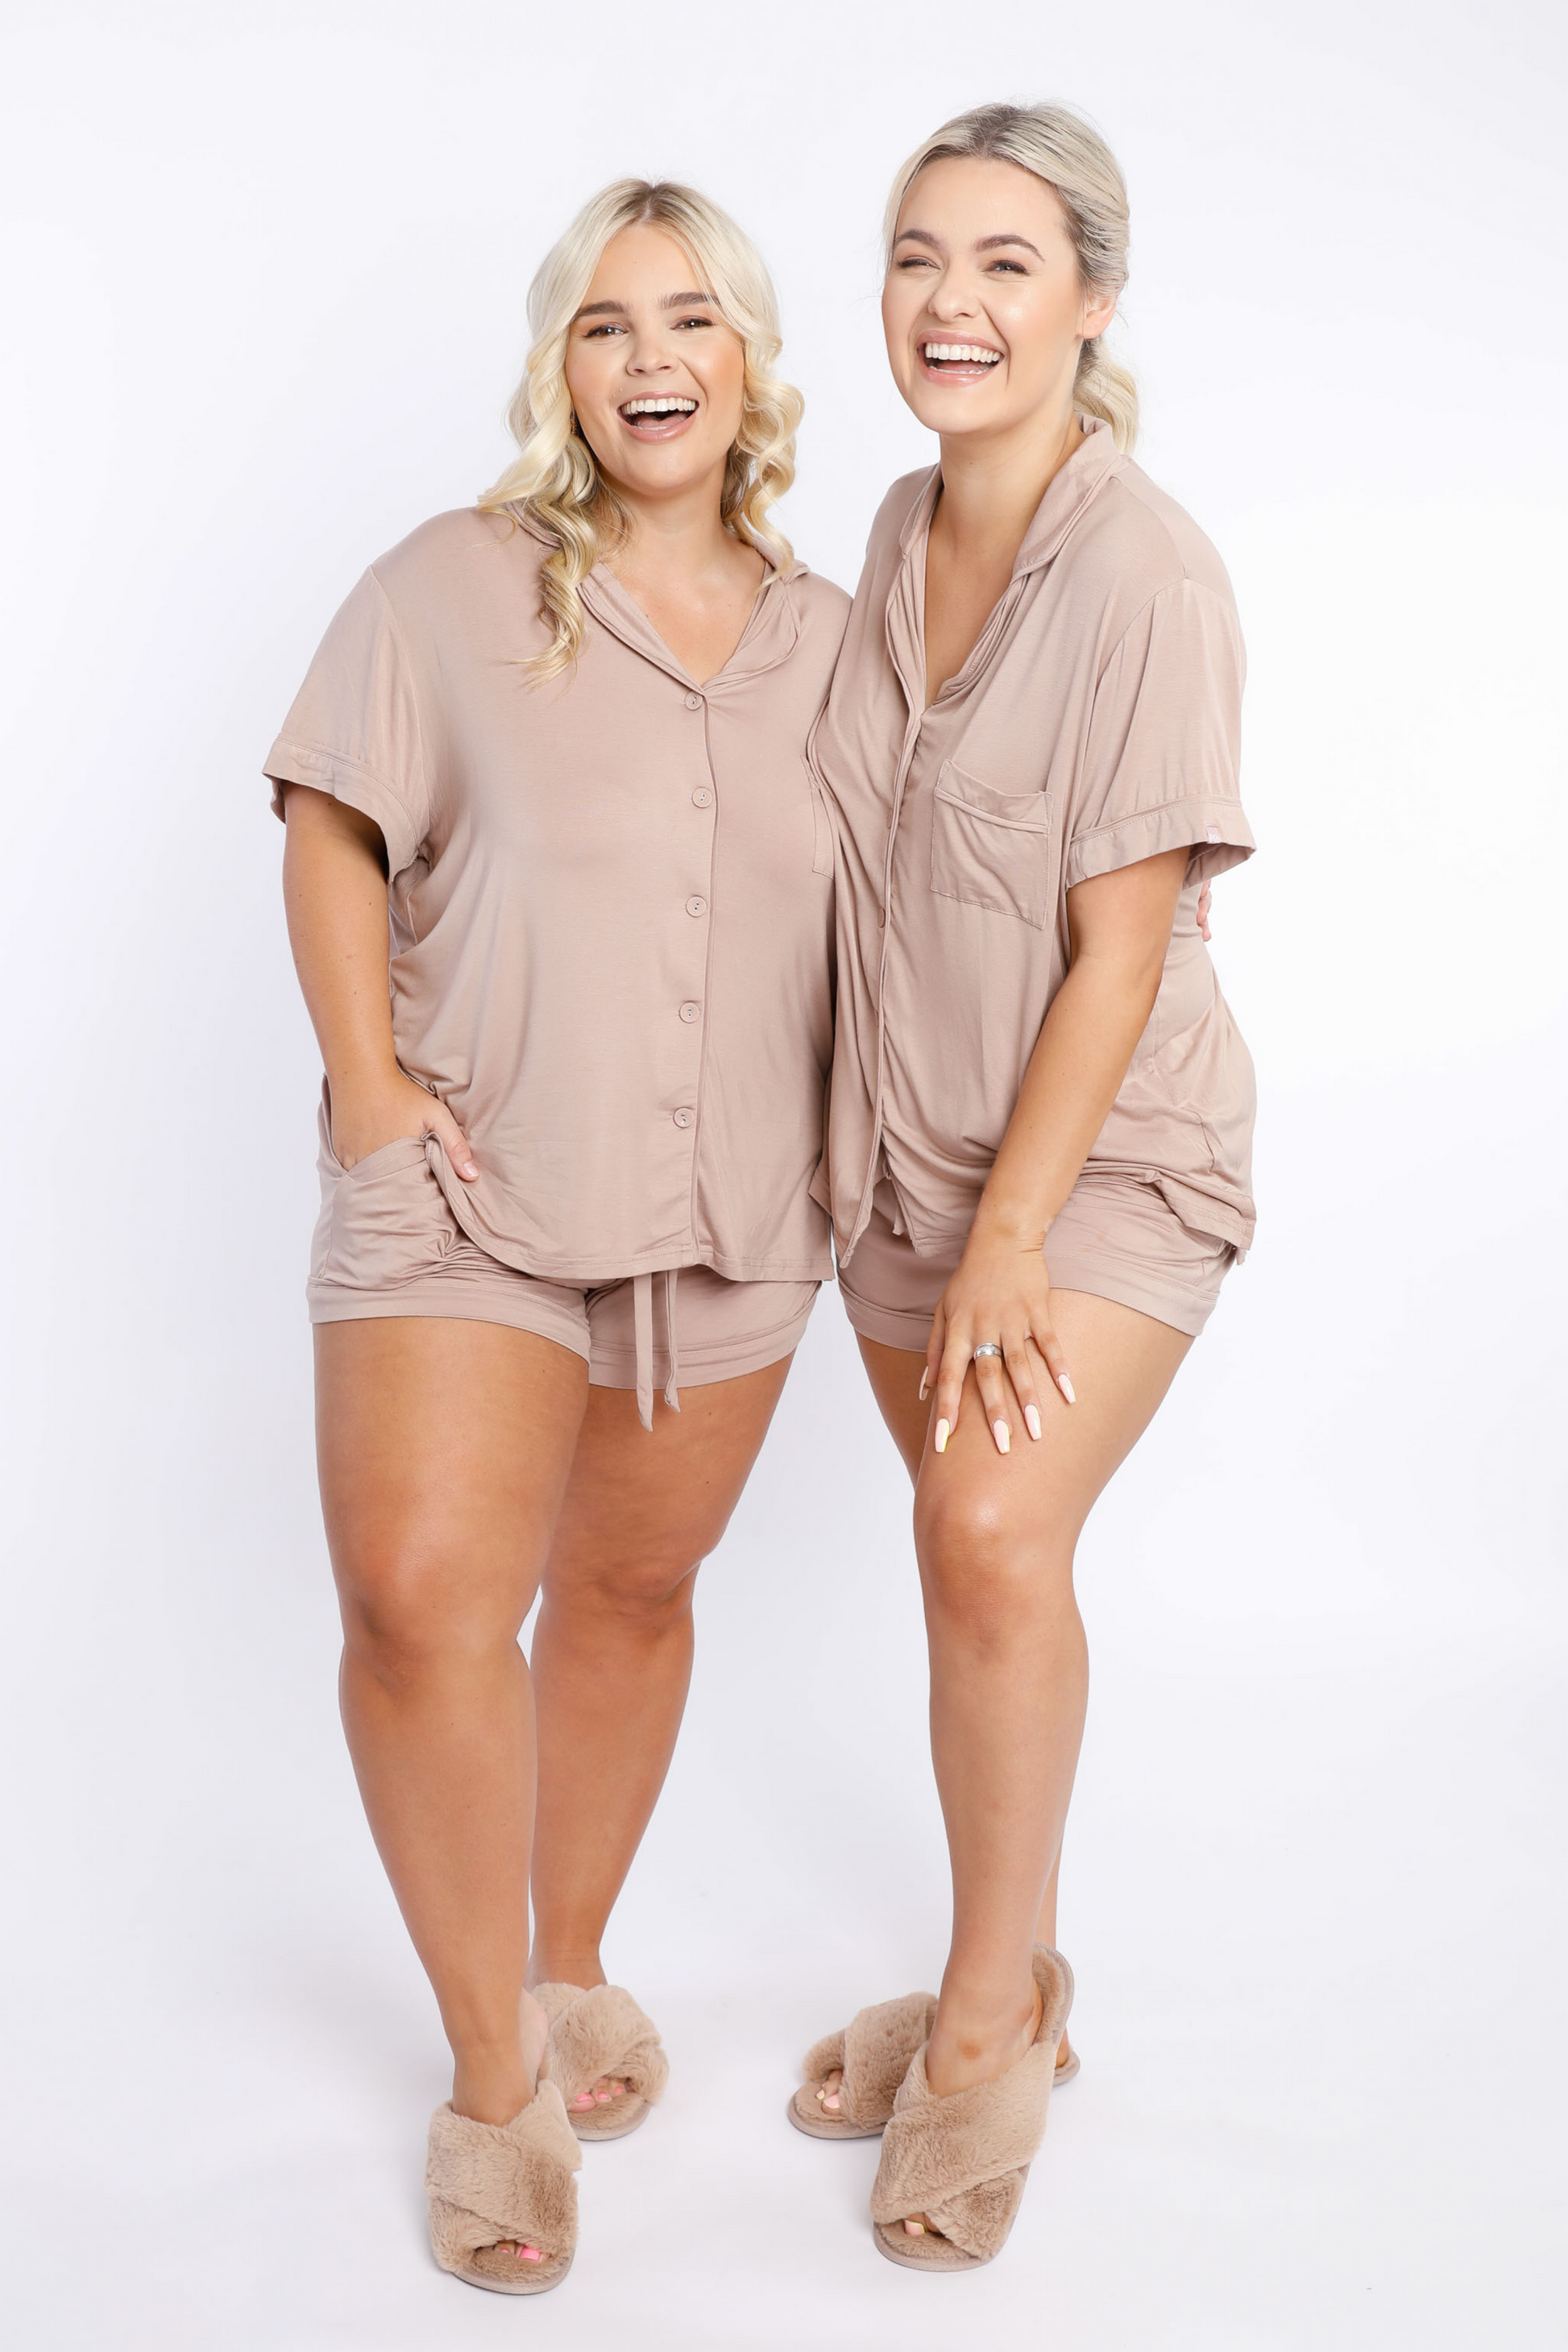 Ready for bed? Relax in style and slip into our short sleeve pyjama top in a lightweight, cooling Jersey fabric. Featuring short sleeves, collar, front pocket at left breast and classic buttons centre front. It is a relaxed style warm nights cool and comfortable feel. Pair with the PJ shorts for the perfect sleep set.